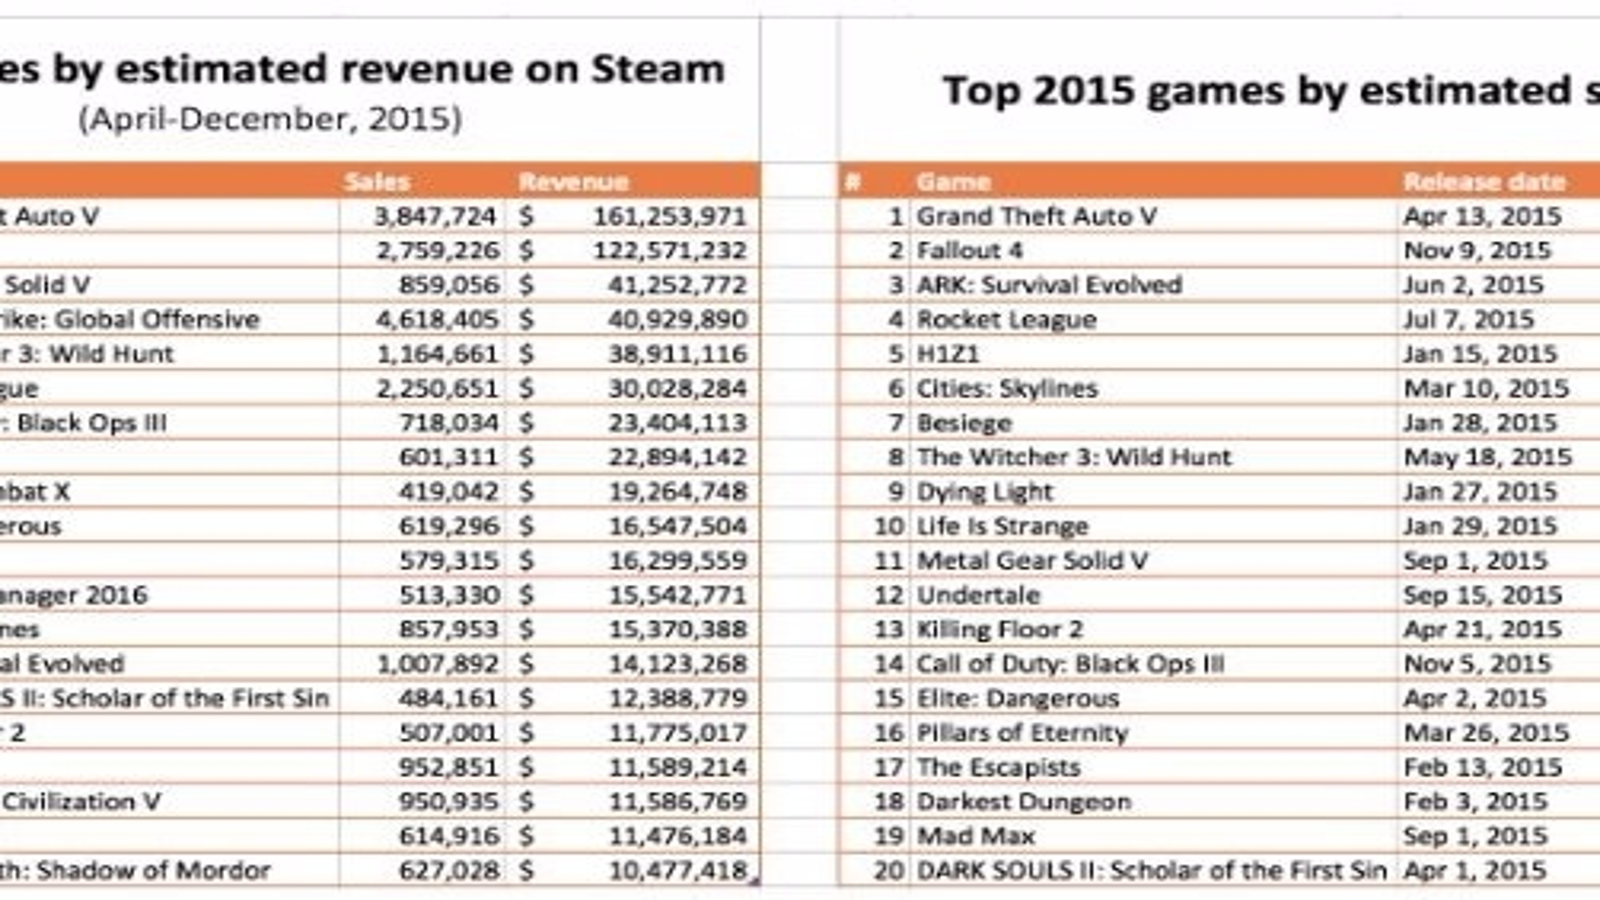 Why The Original Prices Of Games On Steam Are Hardly Ever Reduced Outside  of Sales - Immortallium's Blog